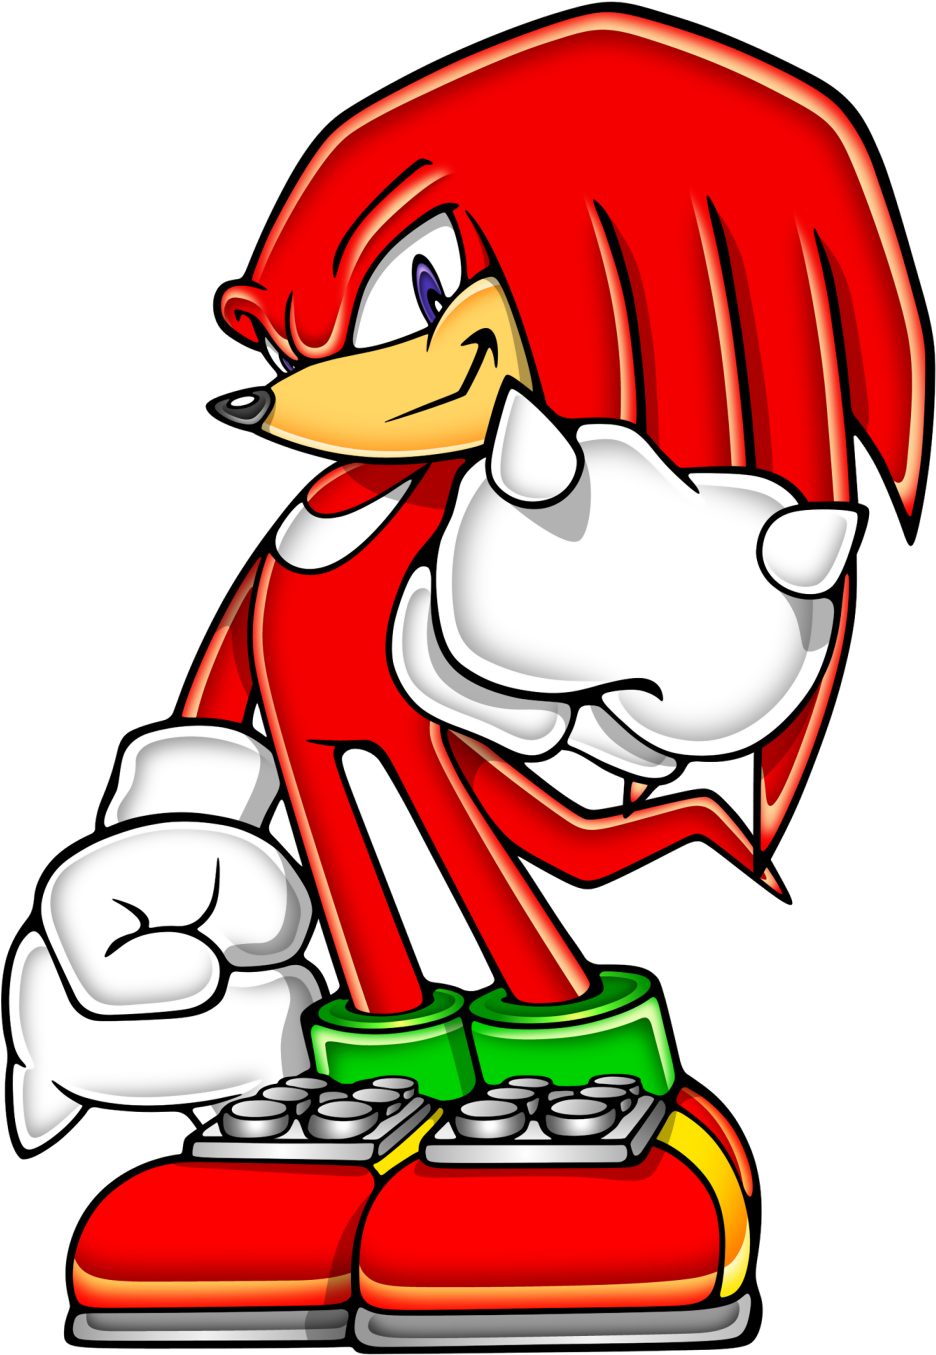 Download and share clipart about Knuckles ◊ - Knuckles Sonic The Hedgehog, ...